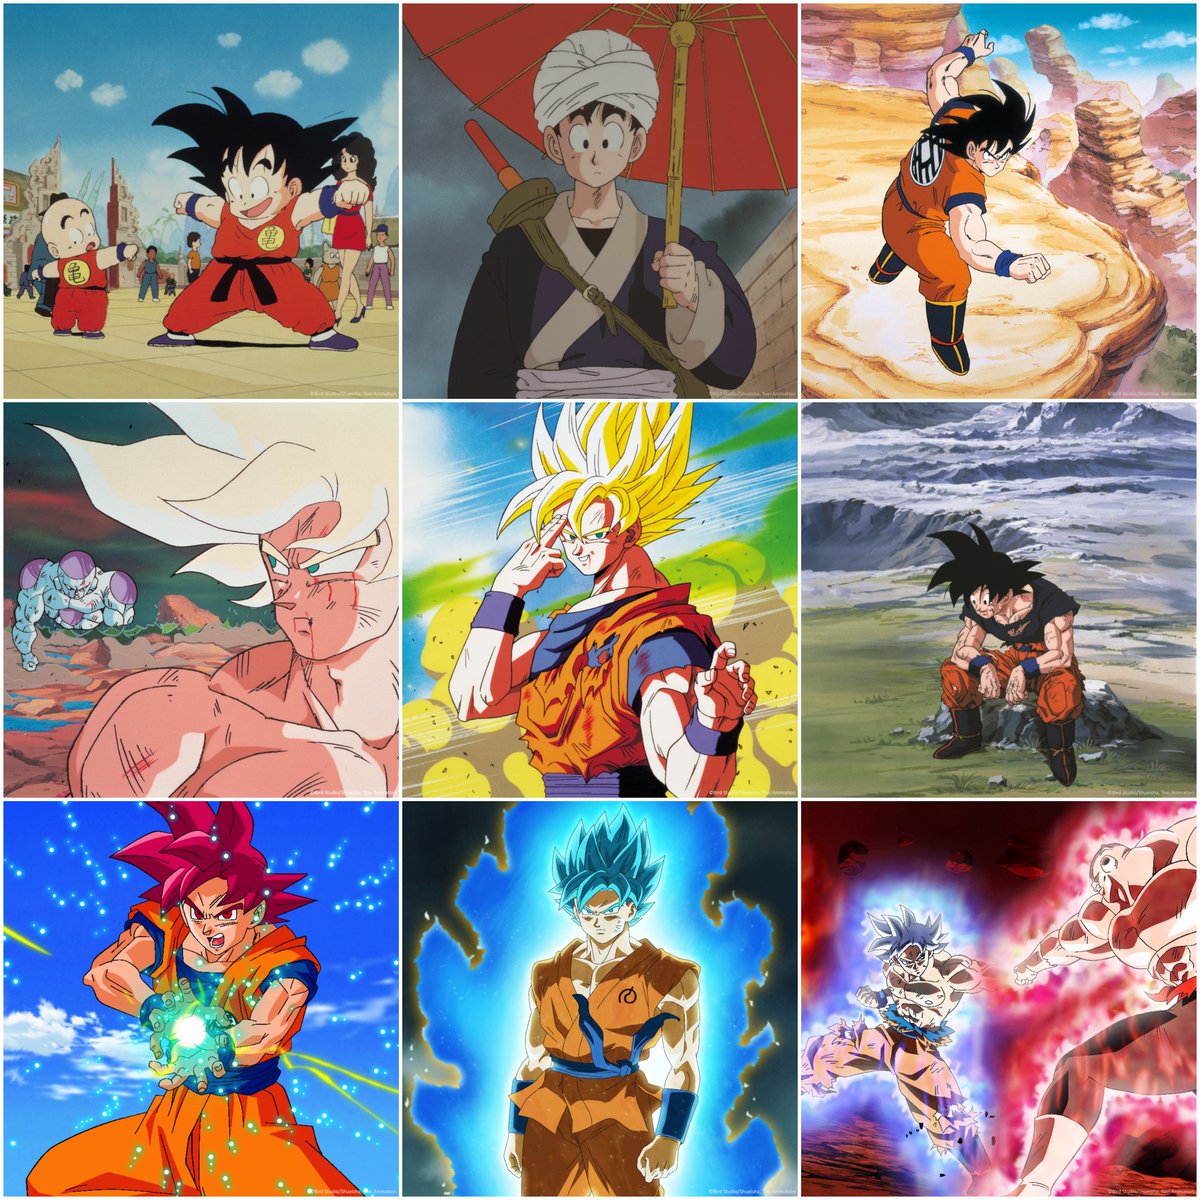 Today is #Goku (5.9) day! Tell us which Goku you like the best! #DragonBall #Gokuday